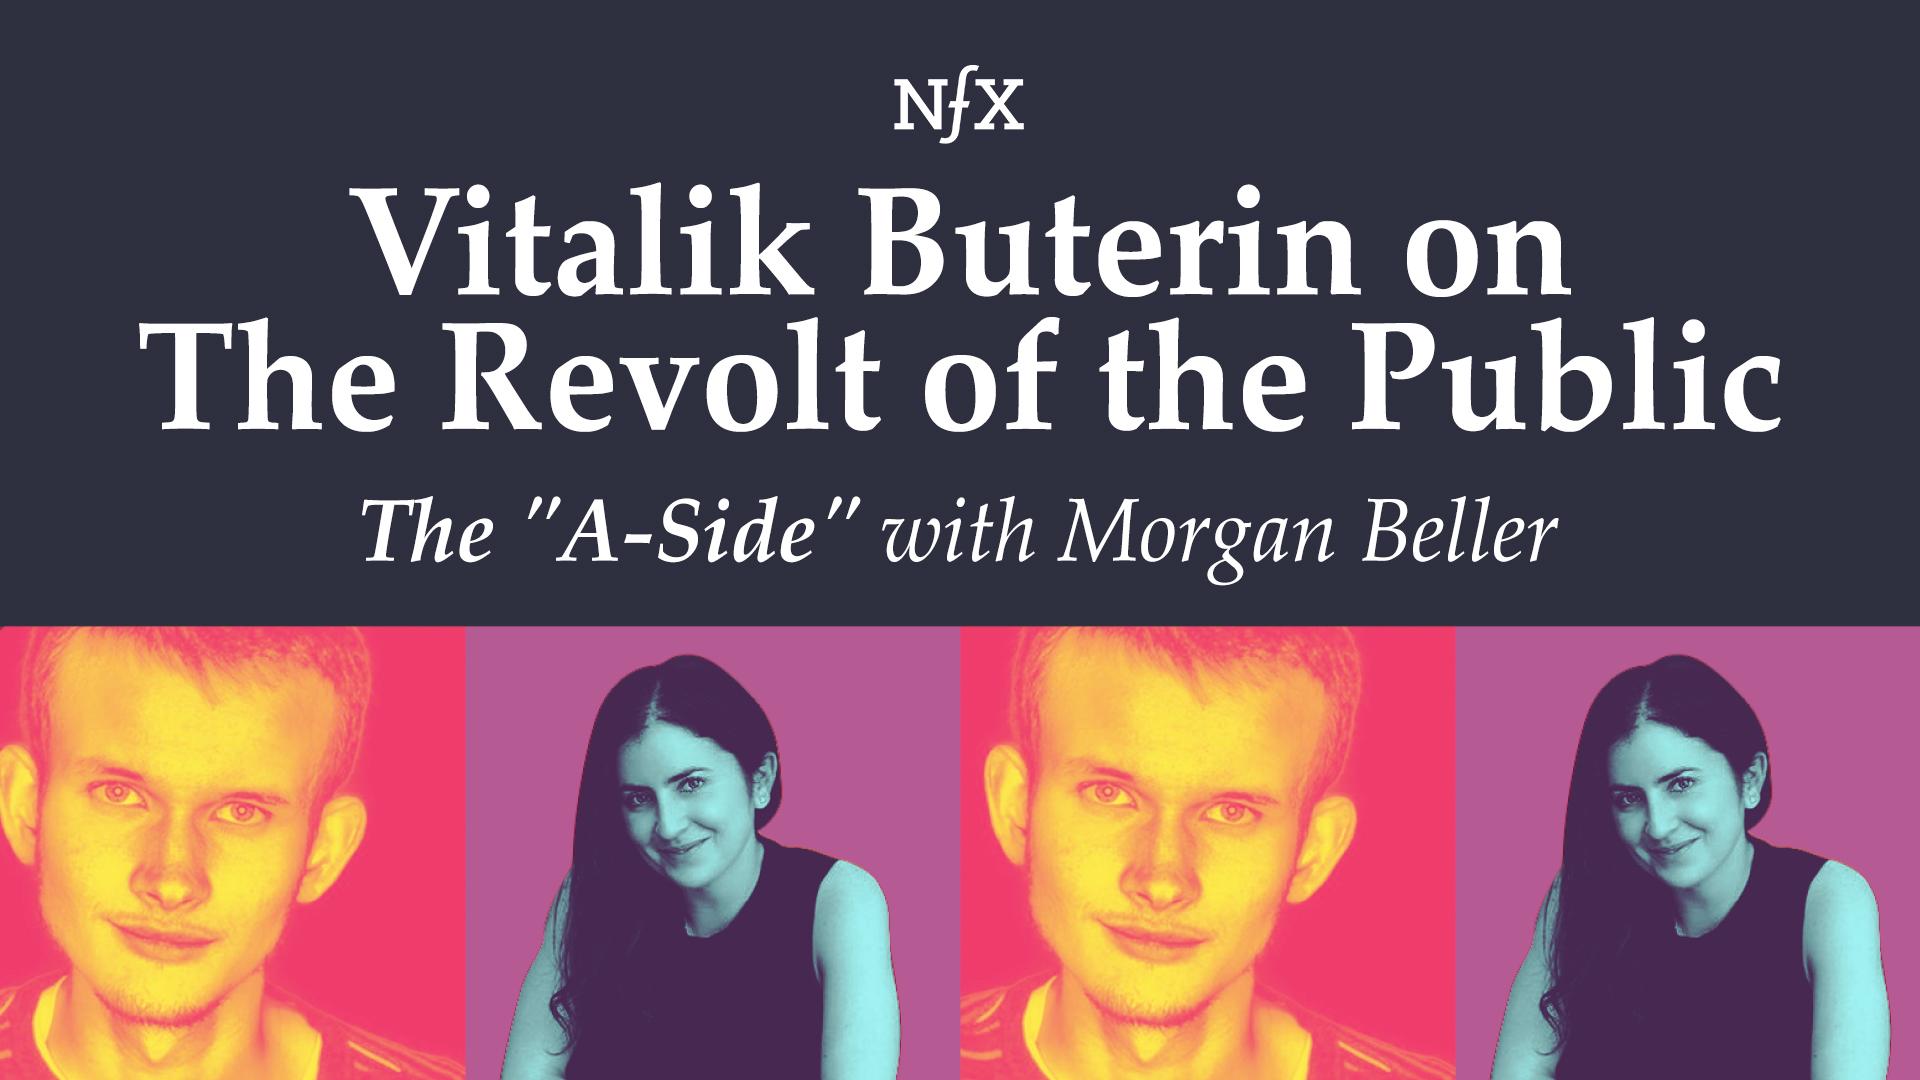 Vitalik Buterin on The Revolt of the Public (The “A-Side”)